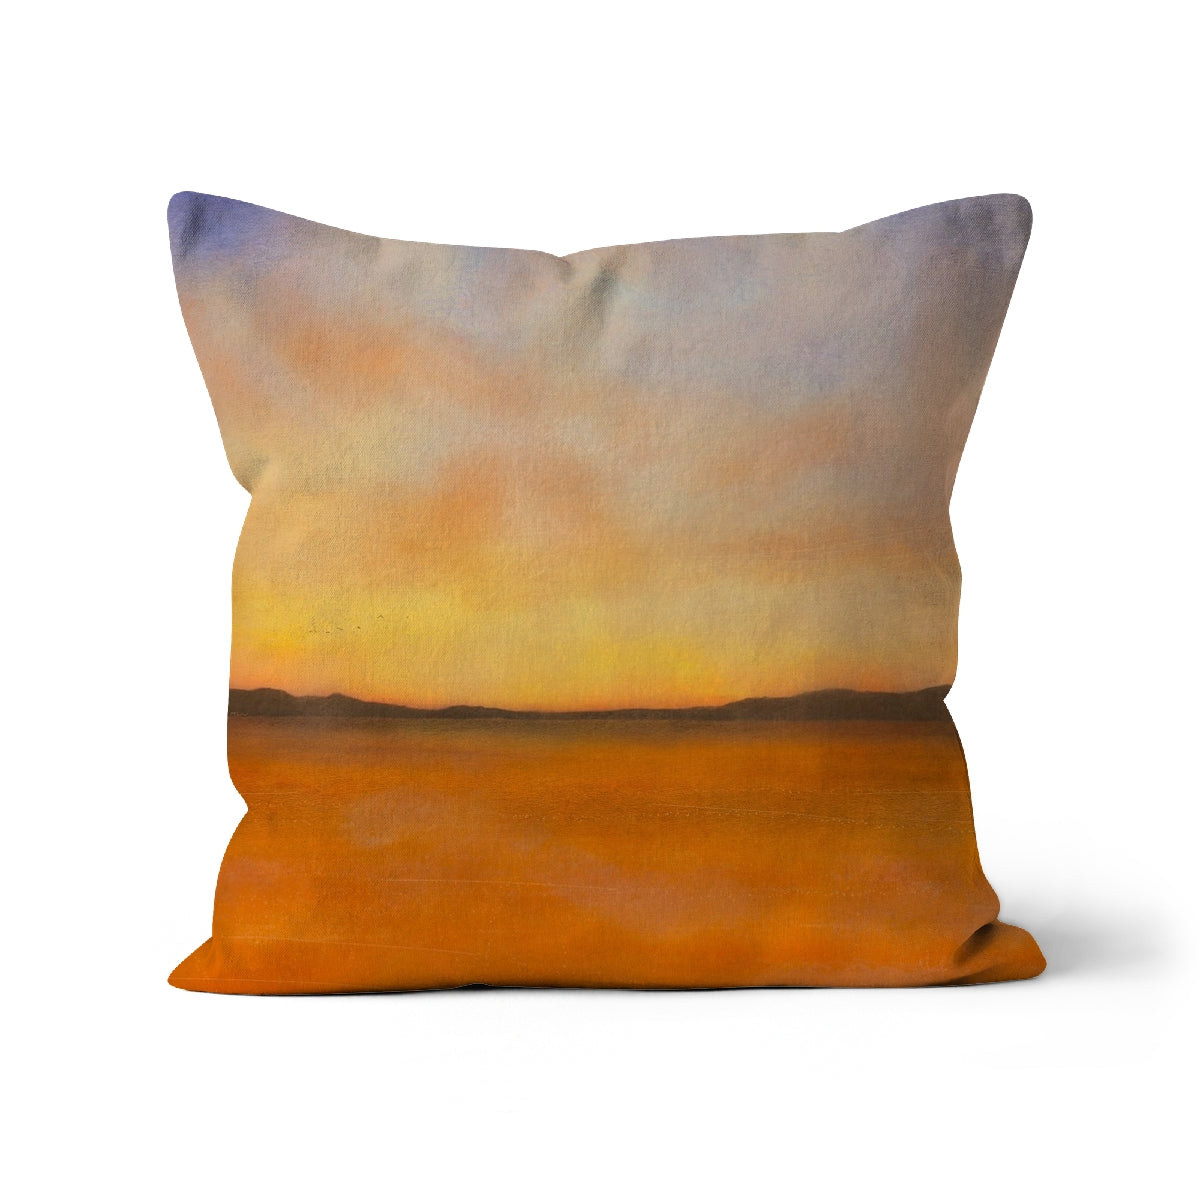 Islay Dawn Art Gifts Cushion-Cushions-Hebridean Islands Art Gallery-Linen-16"x16"-Paintings, Prints, Homeware, Art Gifts From Scotland By Scottish Artist Kevin Hunter